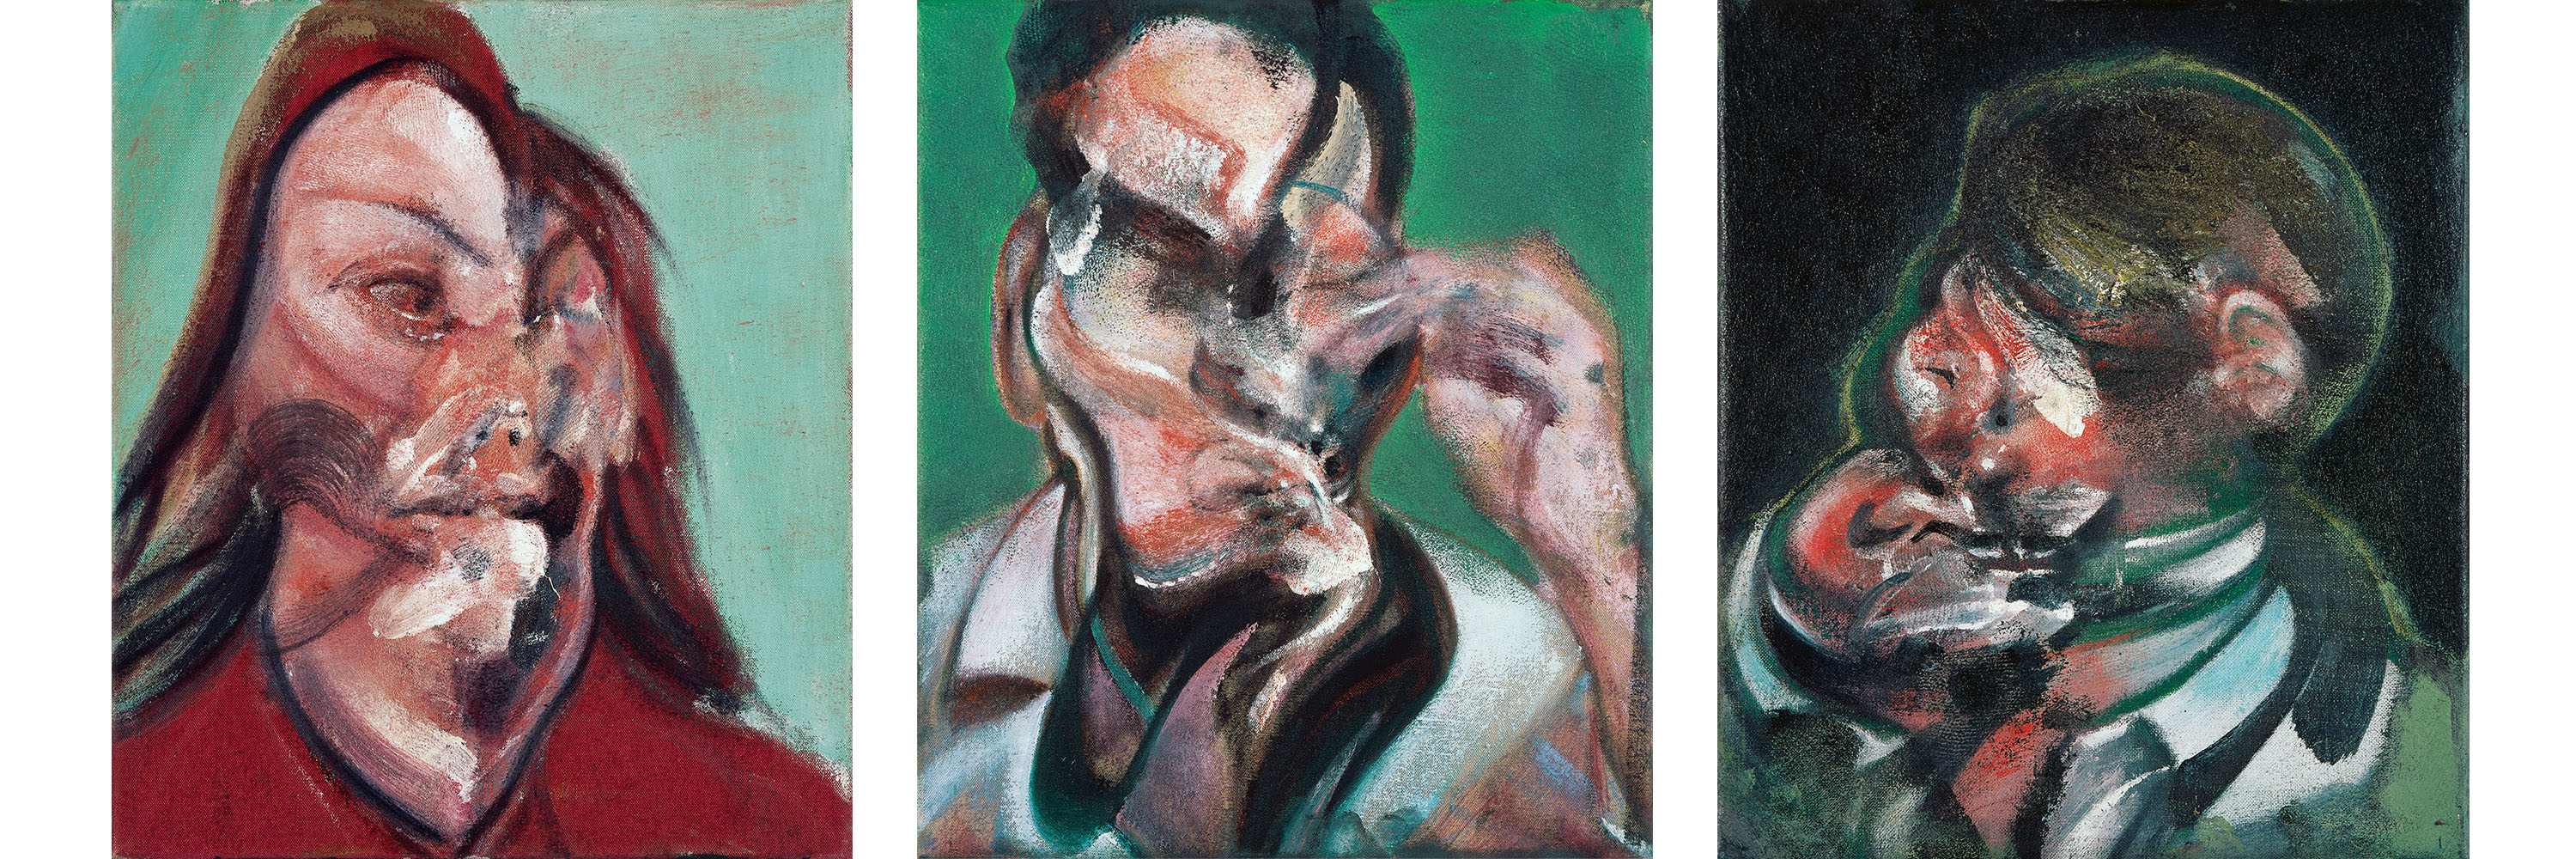 Three Studies for Portraits: Isabel Rawsthorne, Lucian Freud and J. H., 1966. Oil on canvas. CR no. 66-08. © The Estate of Francis Bacon / DACS London 2022. All rights reserved.